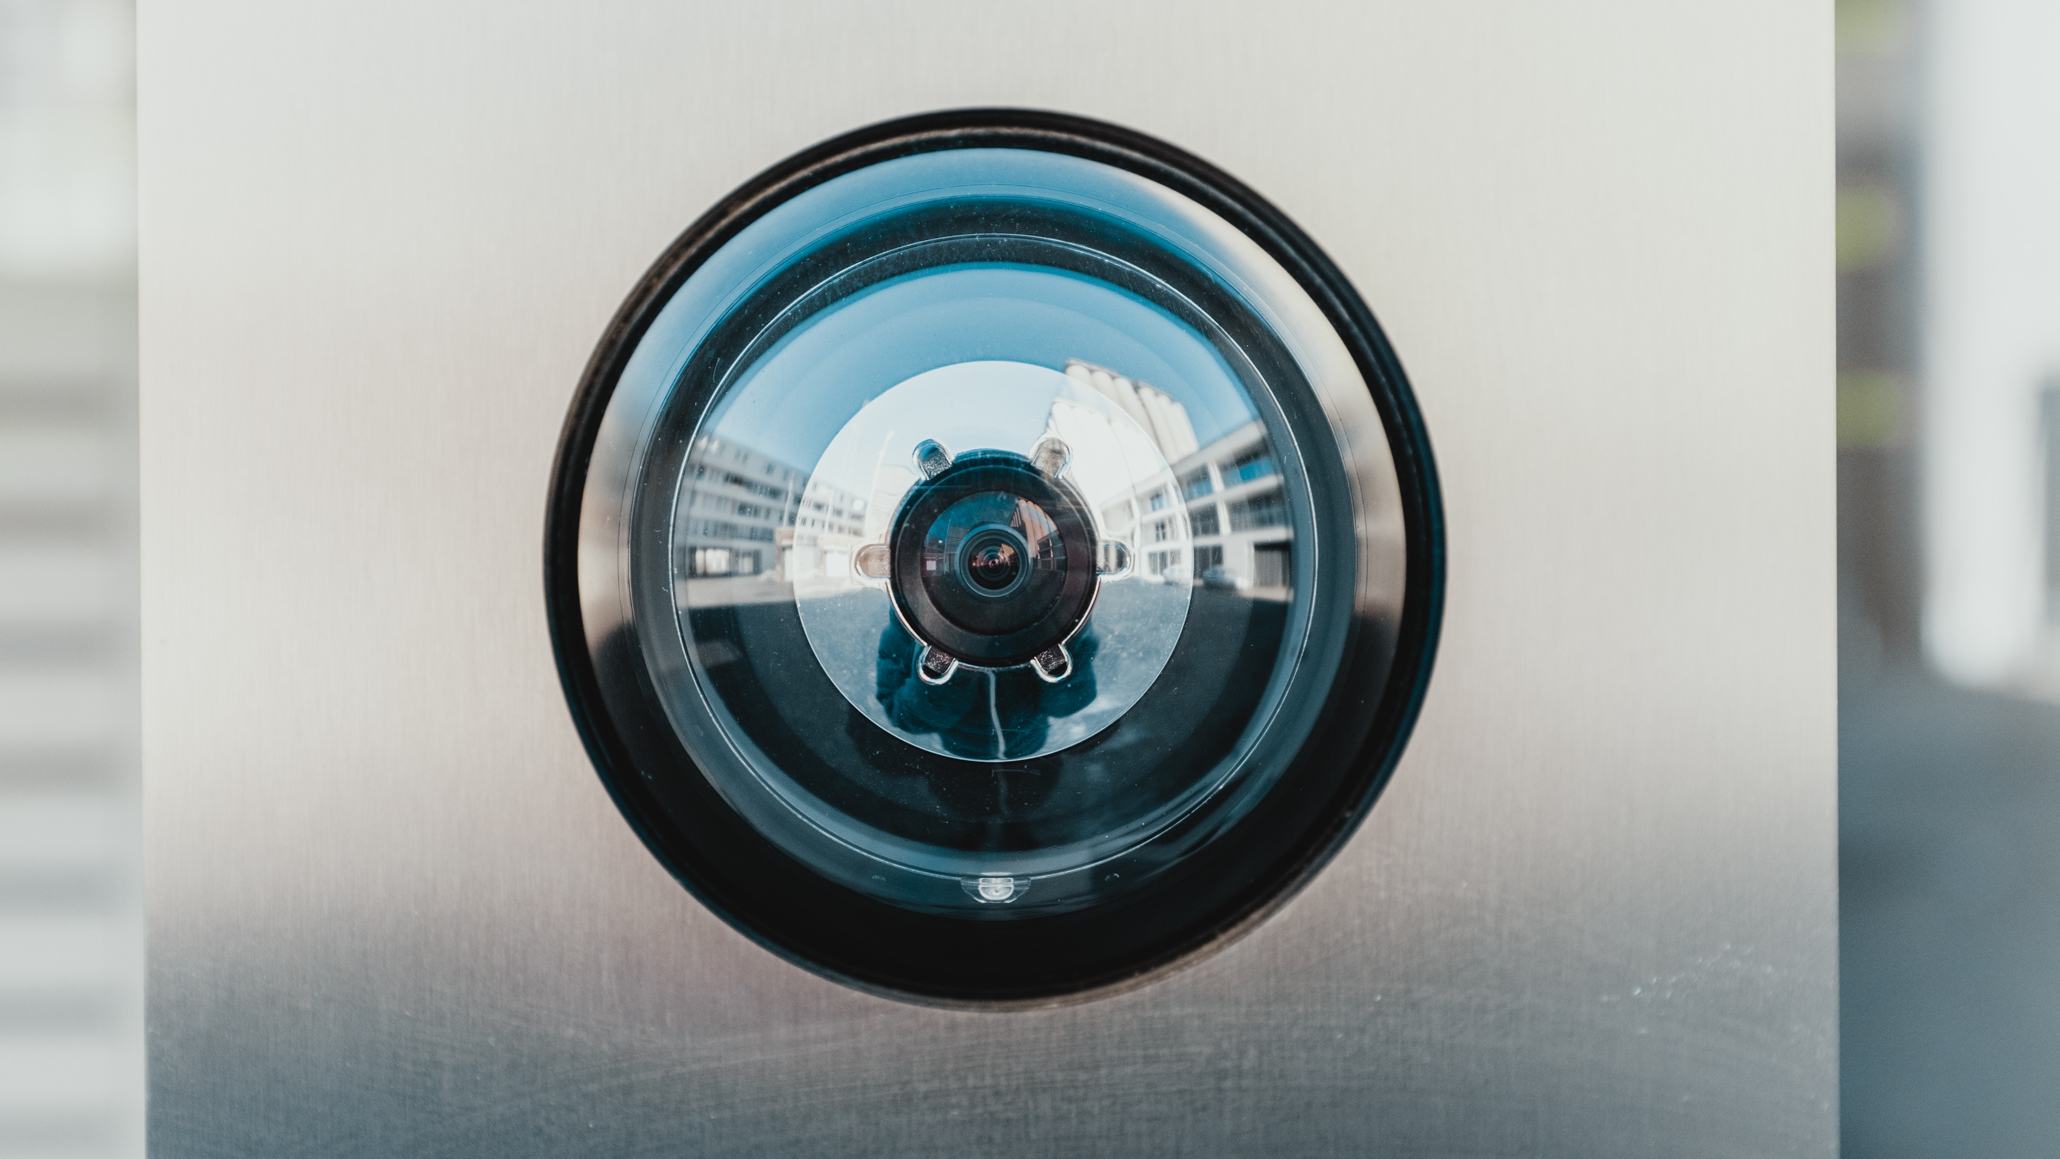 The bane of intruders seeking to burglarize your home, security cameras can bring a high level of safety to your family. Image: Bernard Hermant on Unsplash.